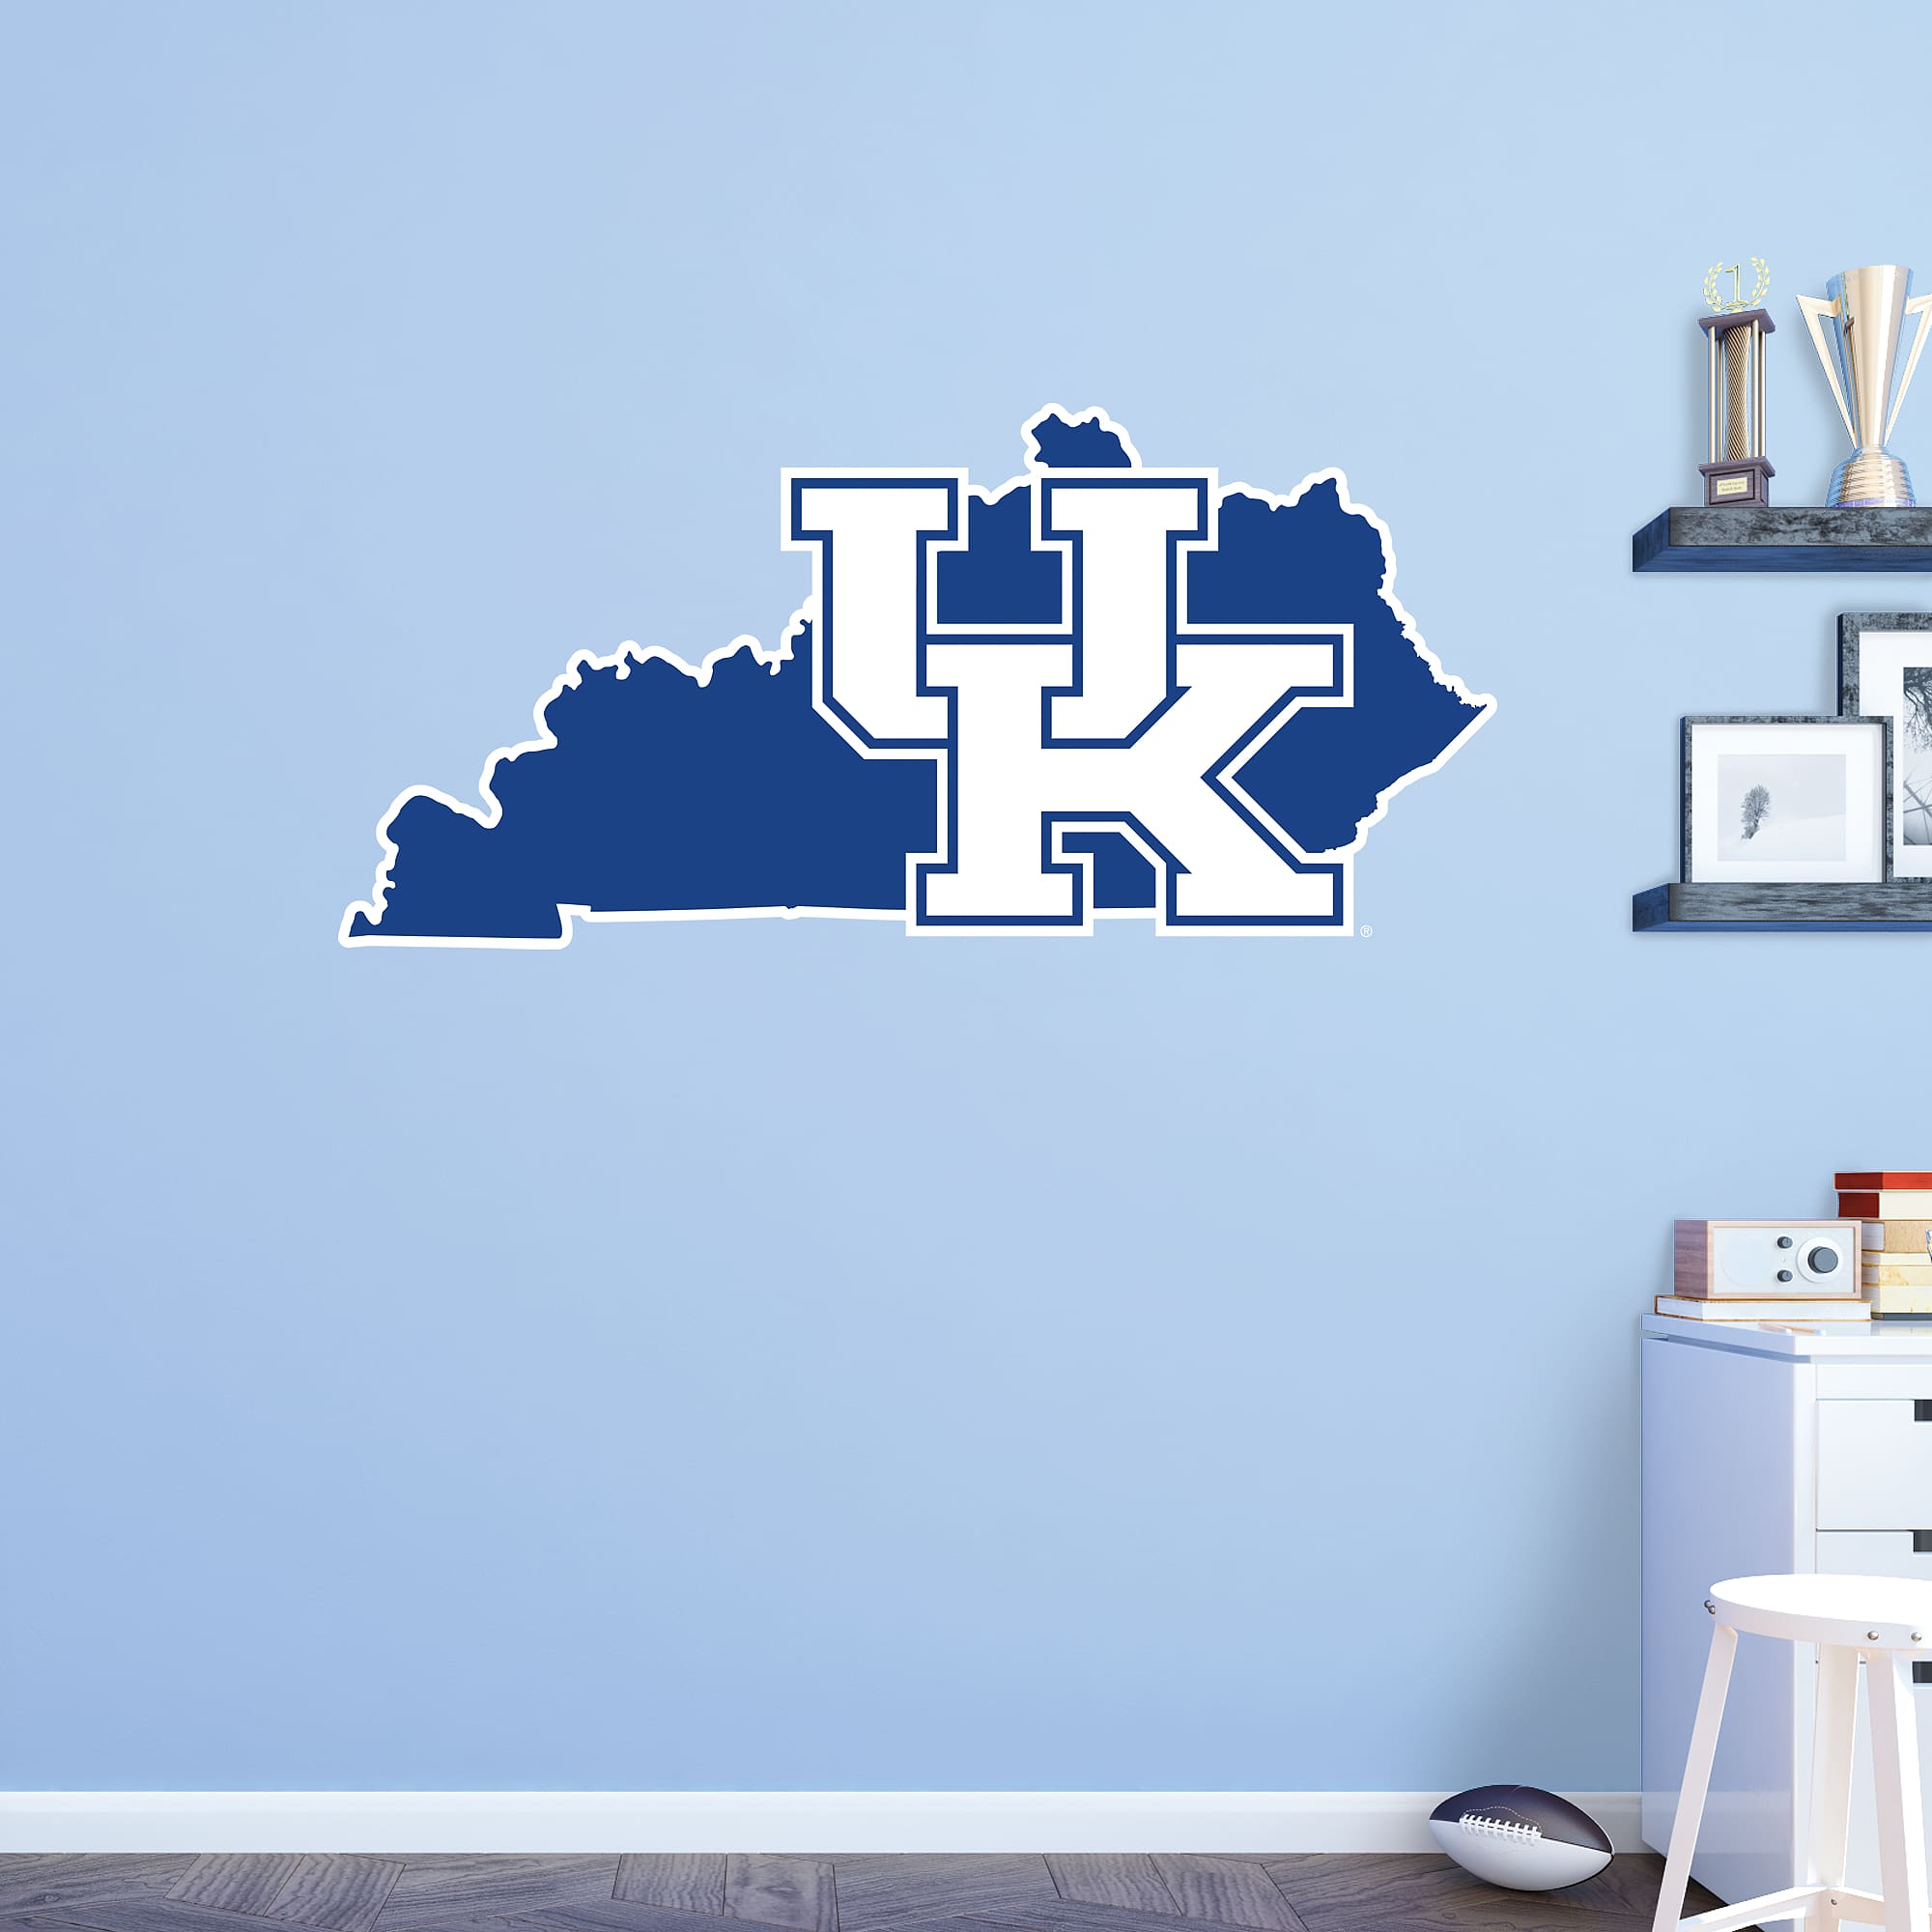 Kentucky Wildcats: State of Kentucky - Officially Licensed Removable Wall Decal 51.0"W x 24.0"H by Fathead | Vinyl